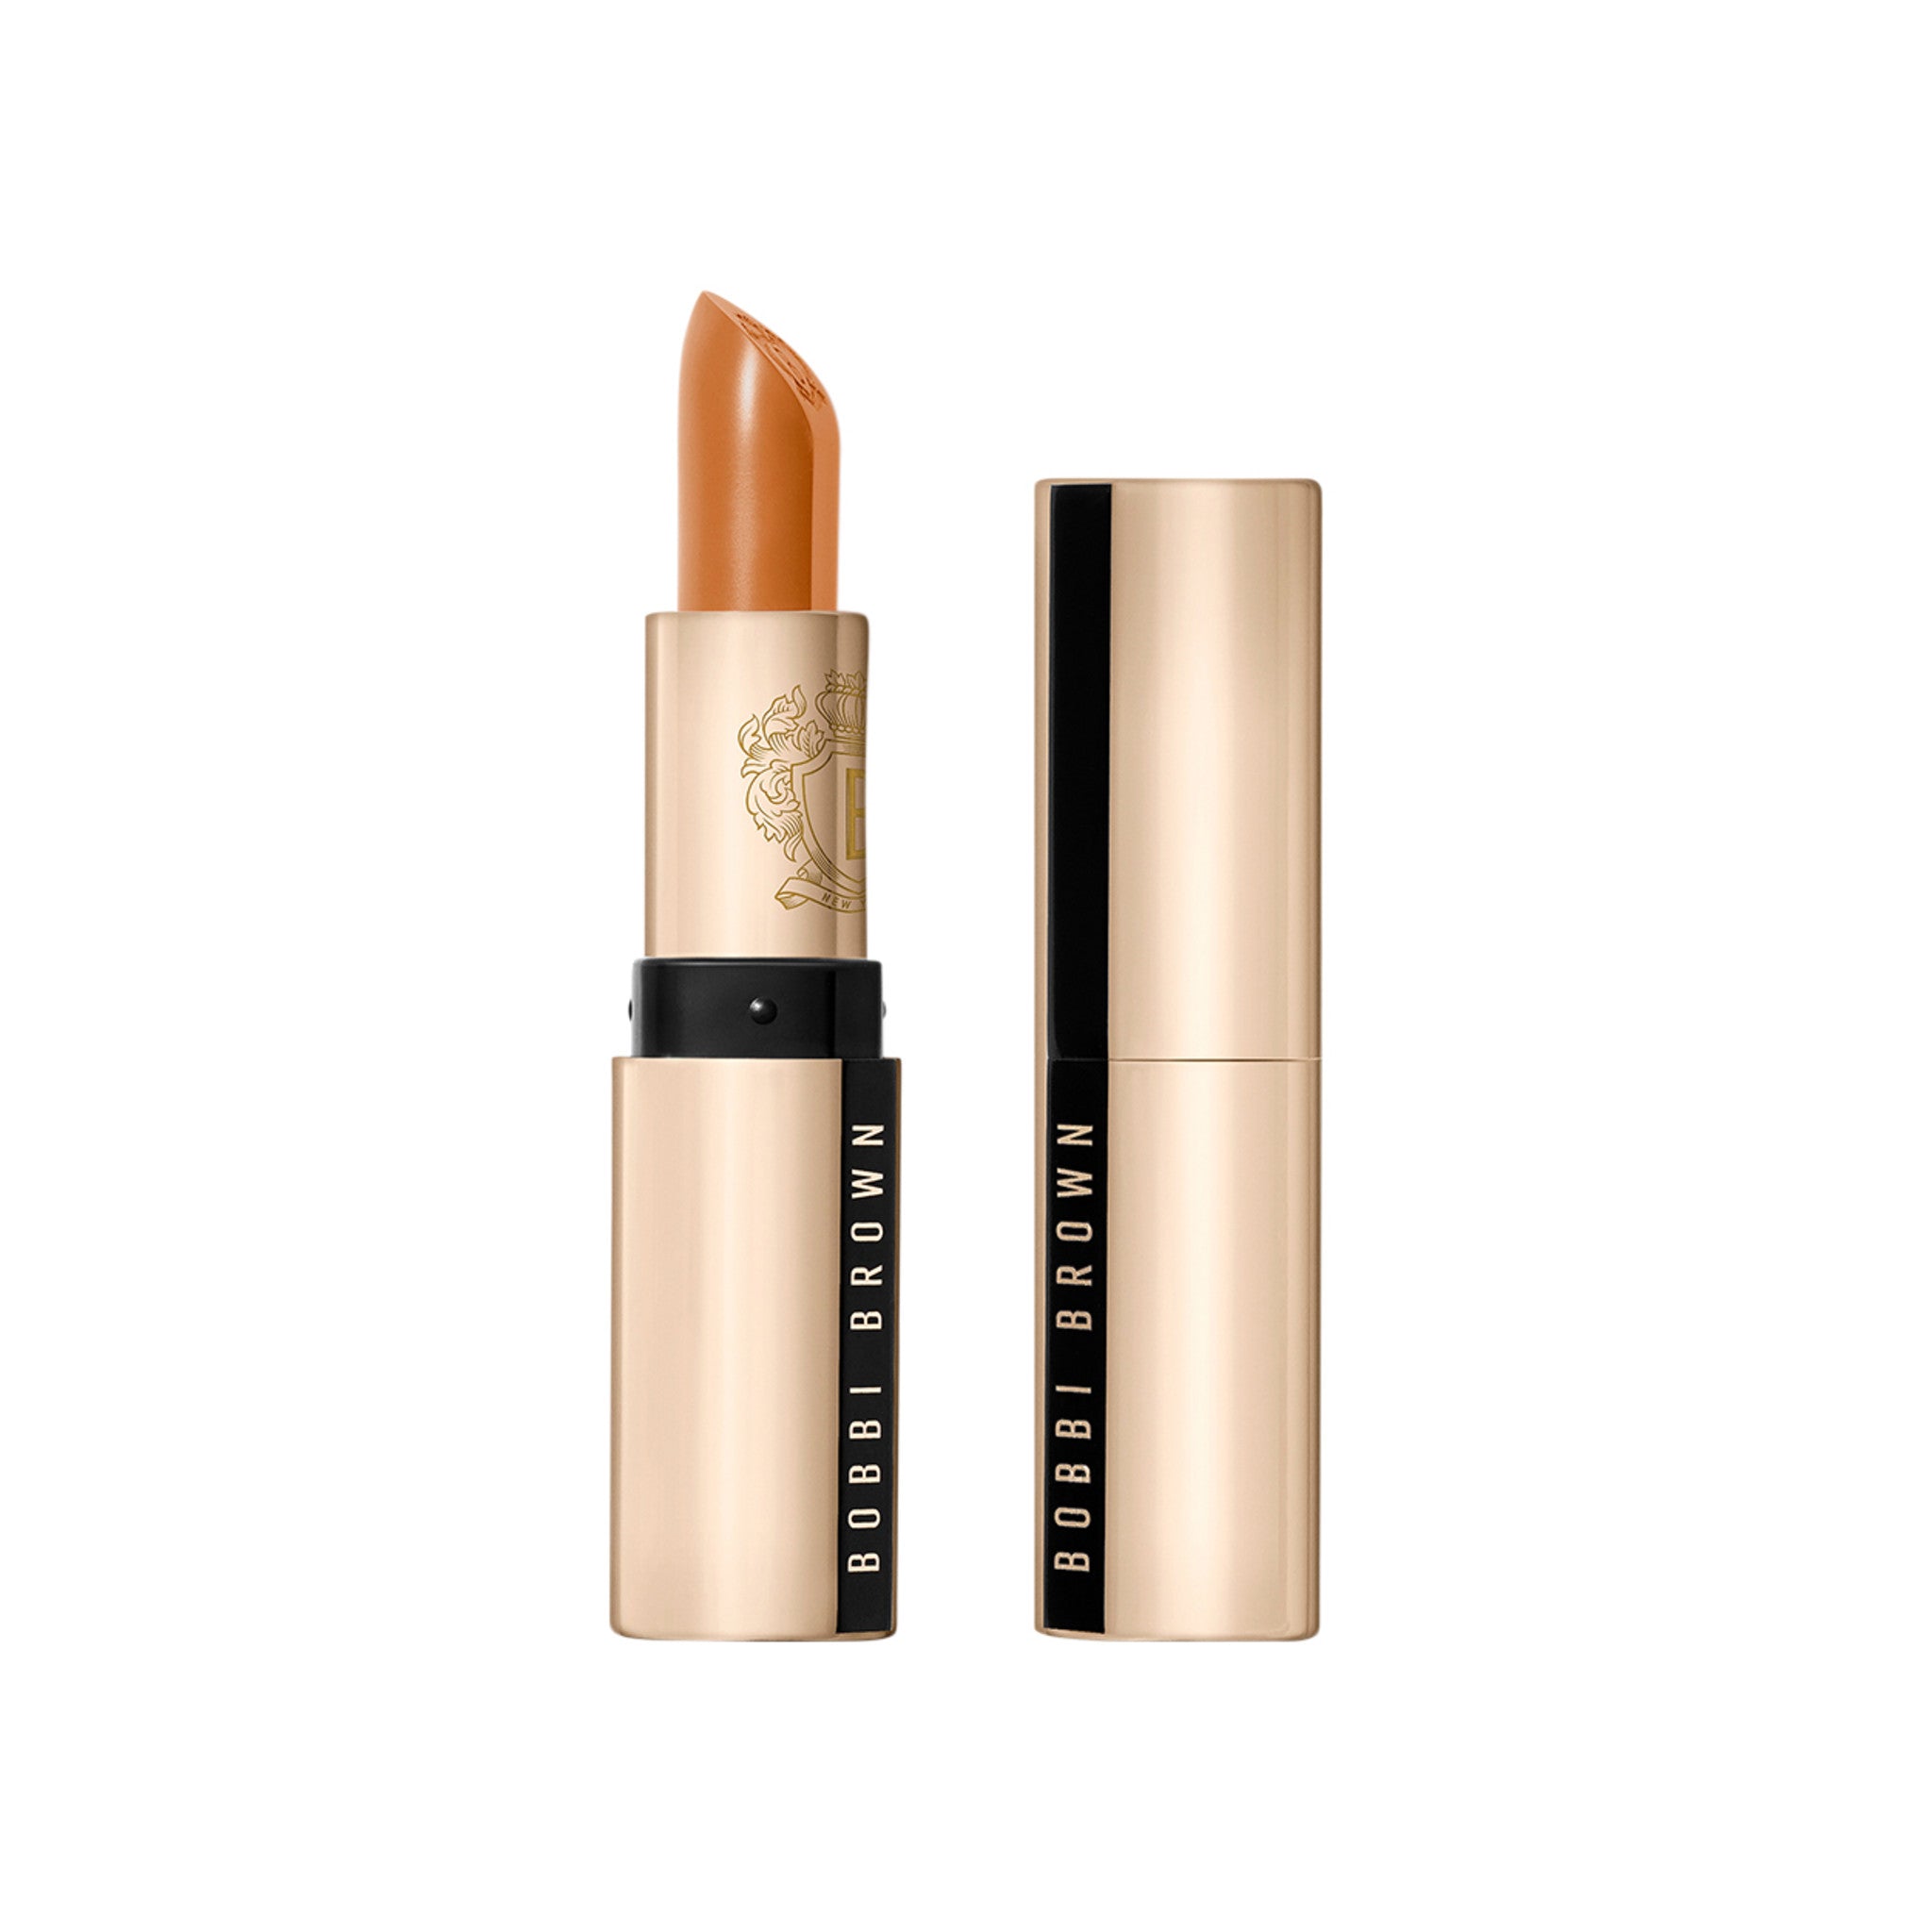 Bobbi Brown Luxe Lipstick Color/Shade variant: Beige Dew main image.